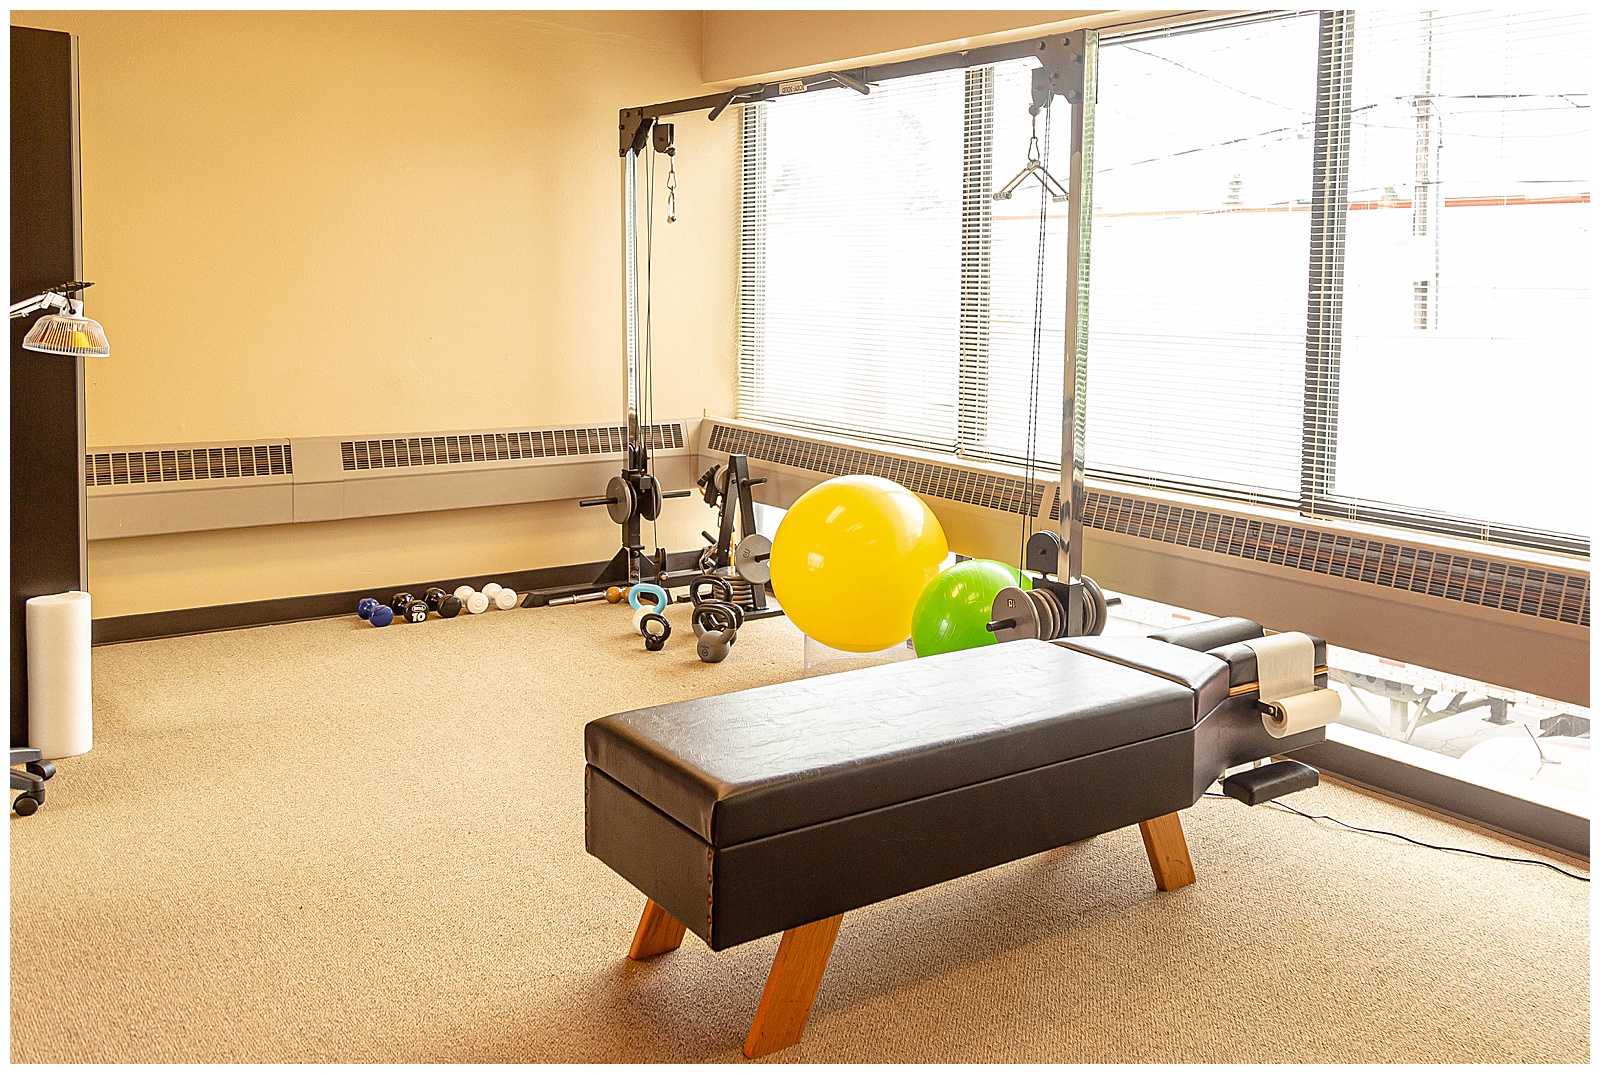 Chiropractic clinic physical therapy room